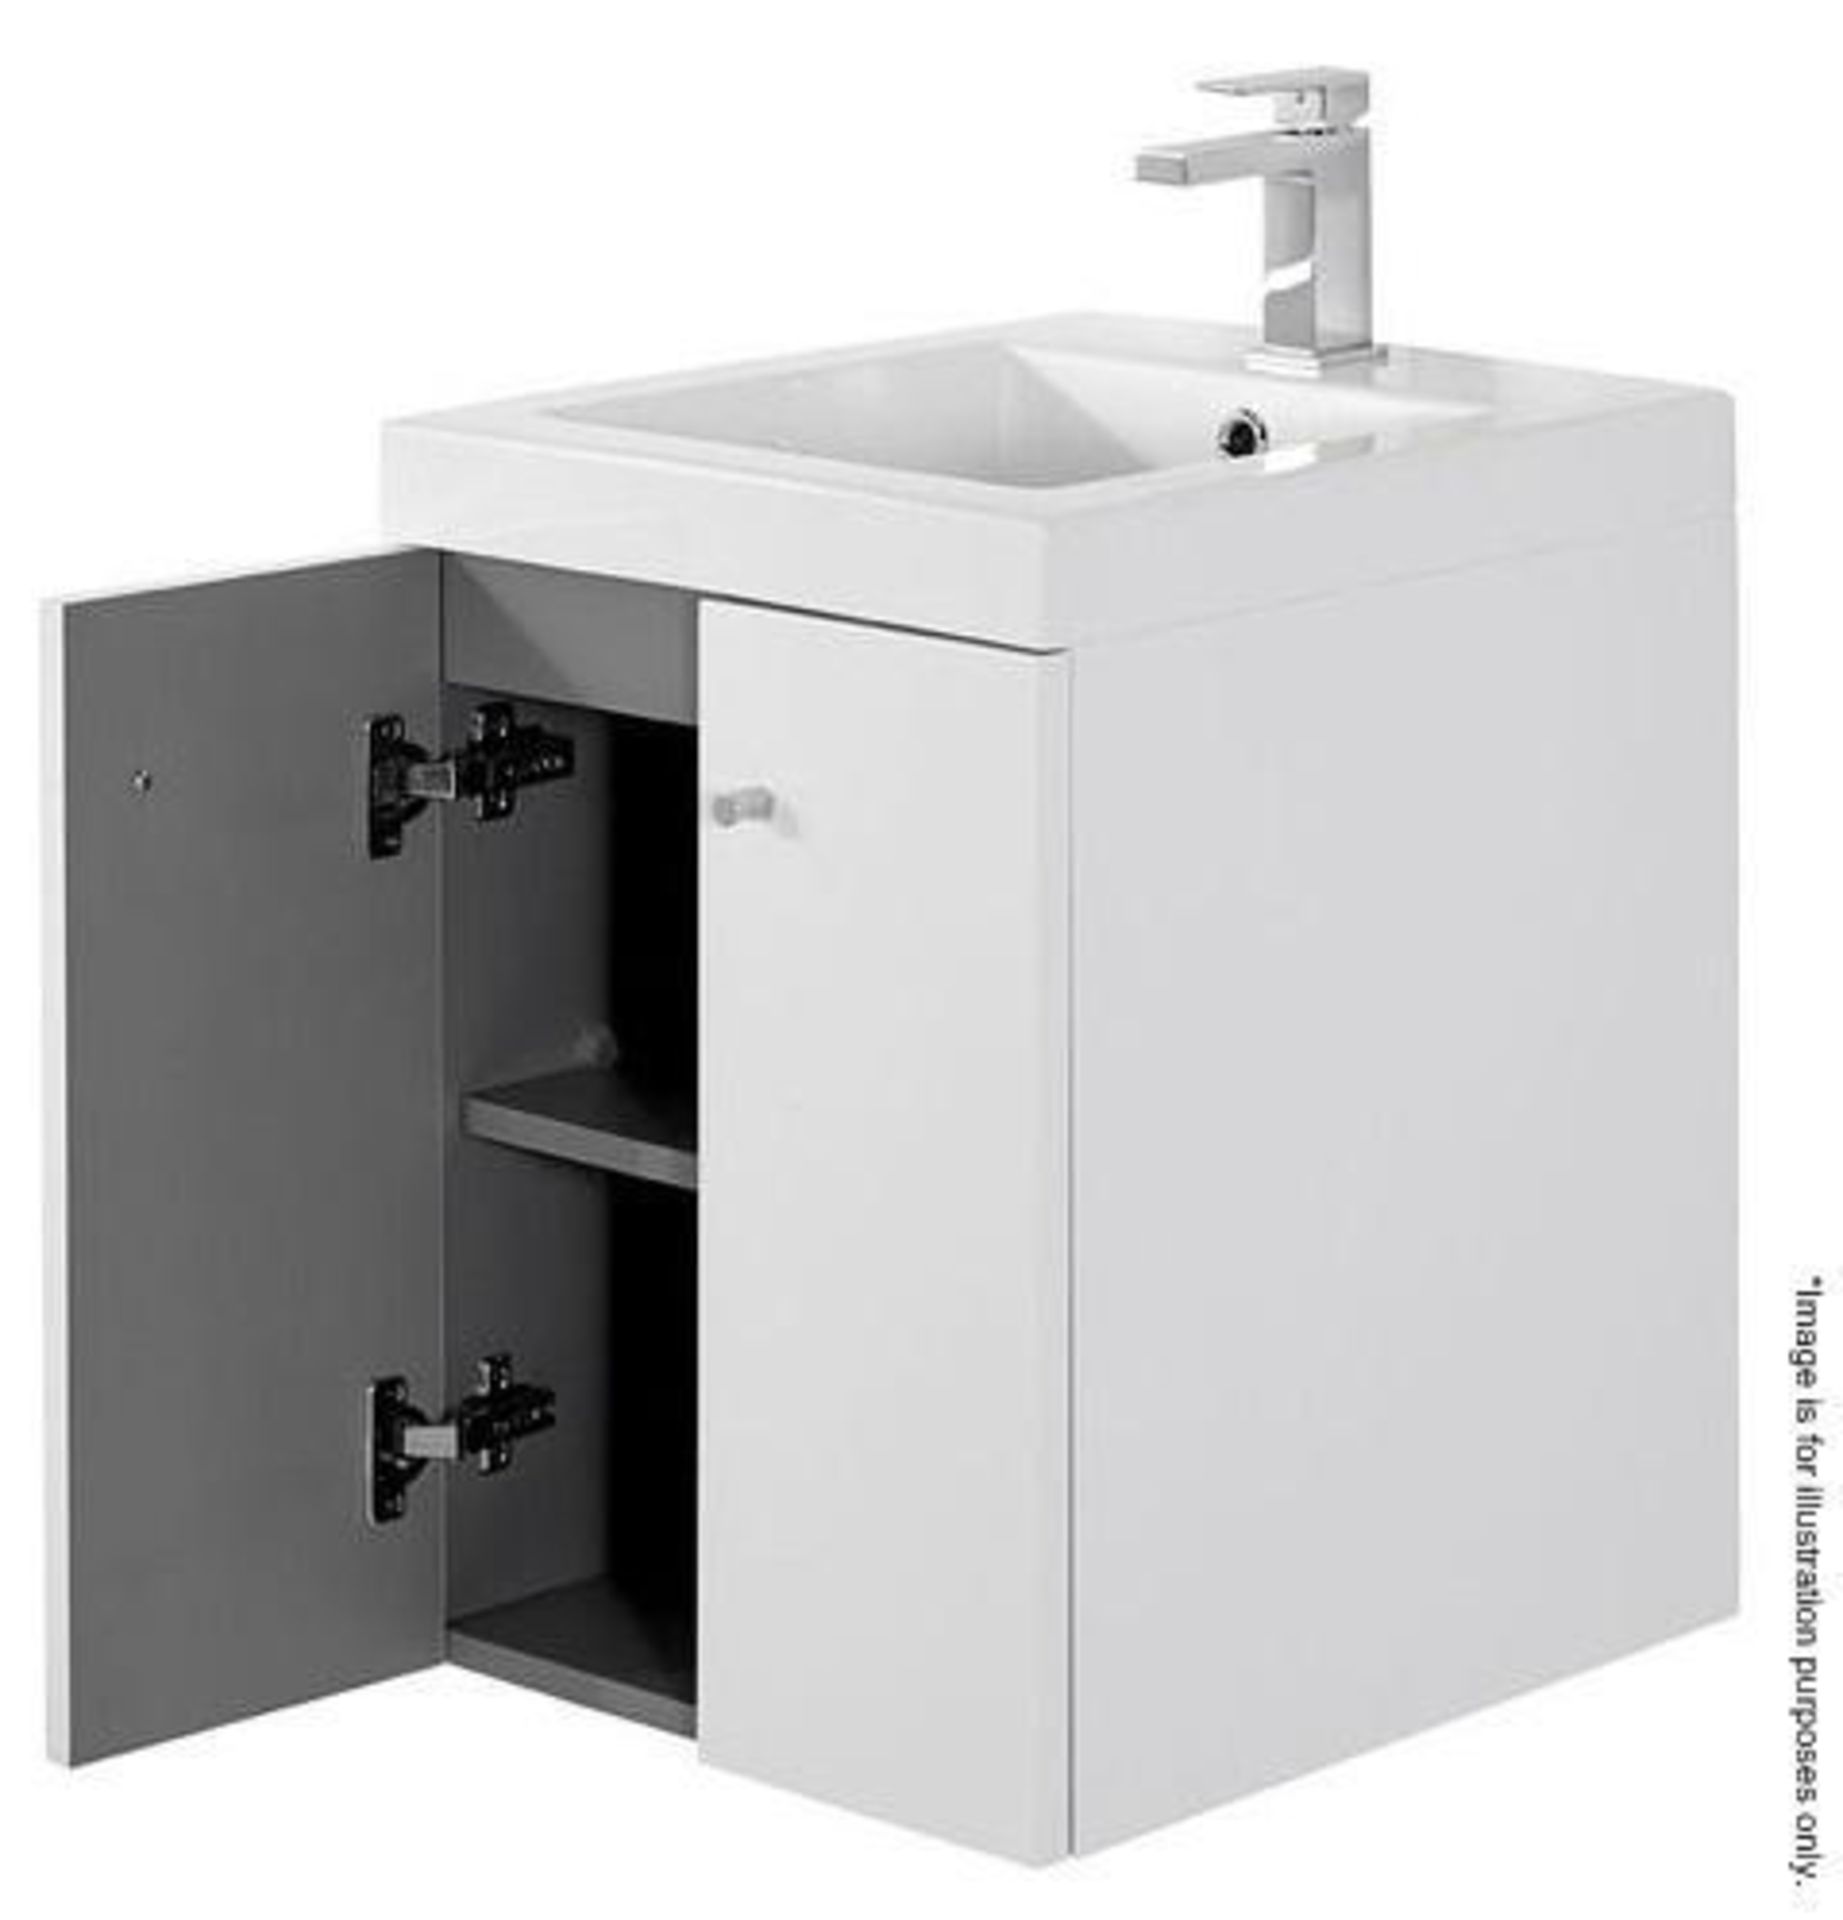 10 x Alpine Duo 400 Wall Hung Vanity Units In Gloss White - Brand New Boxed Stock - Dimensions: H49 - Image 4 of 5